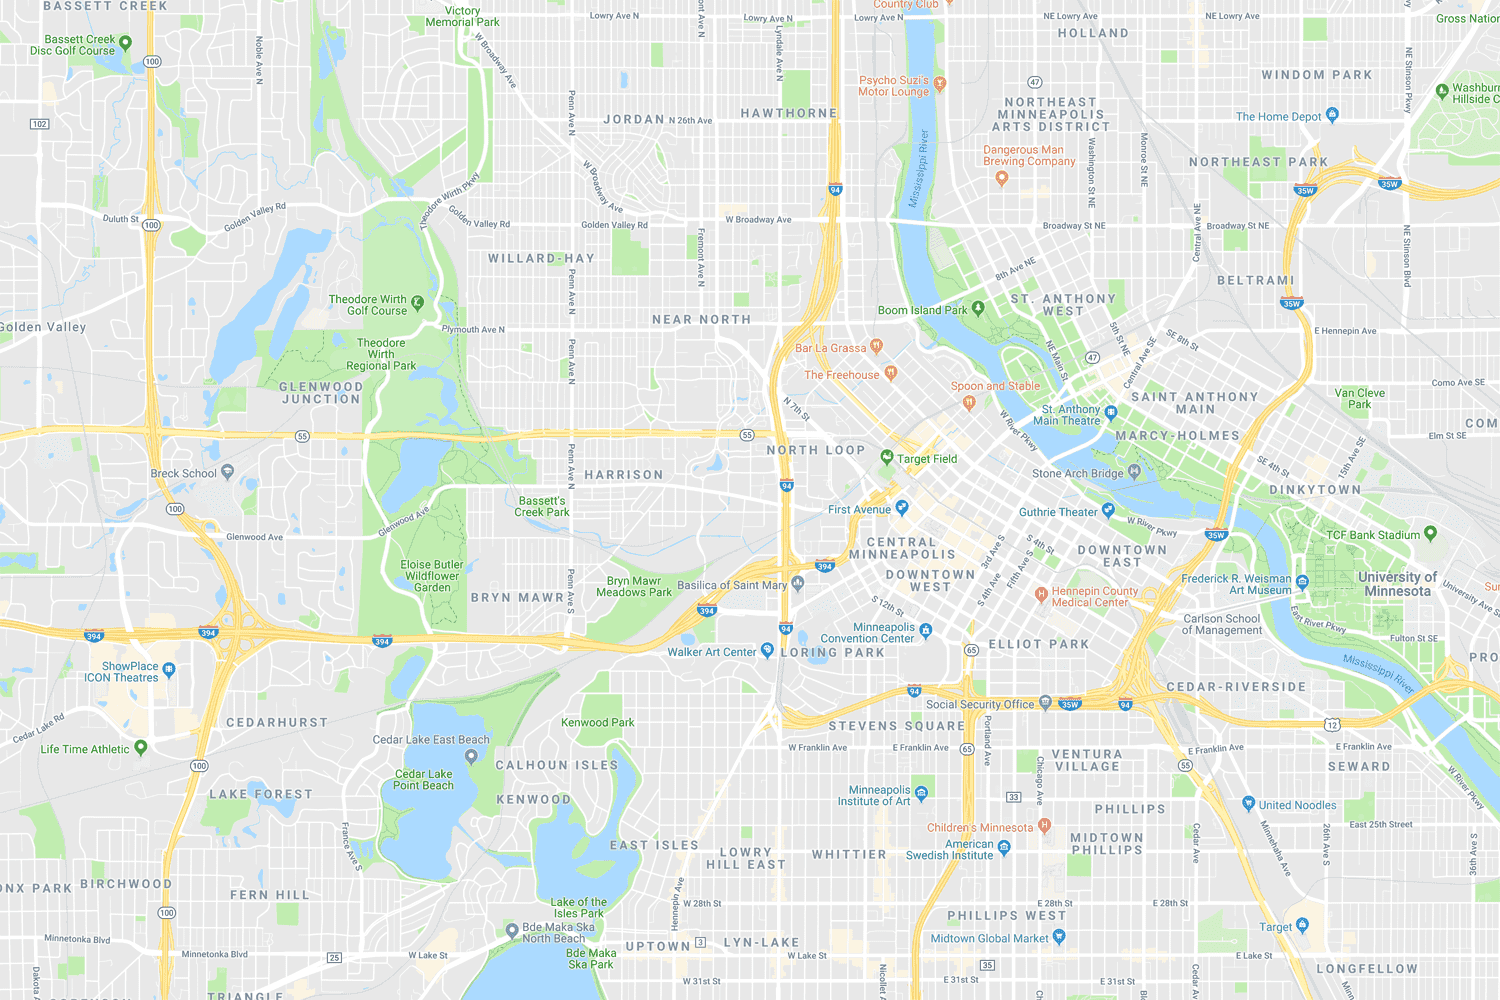 Map of Downtown Minneapolis location